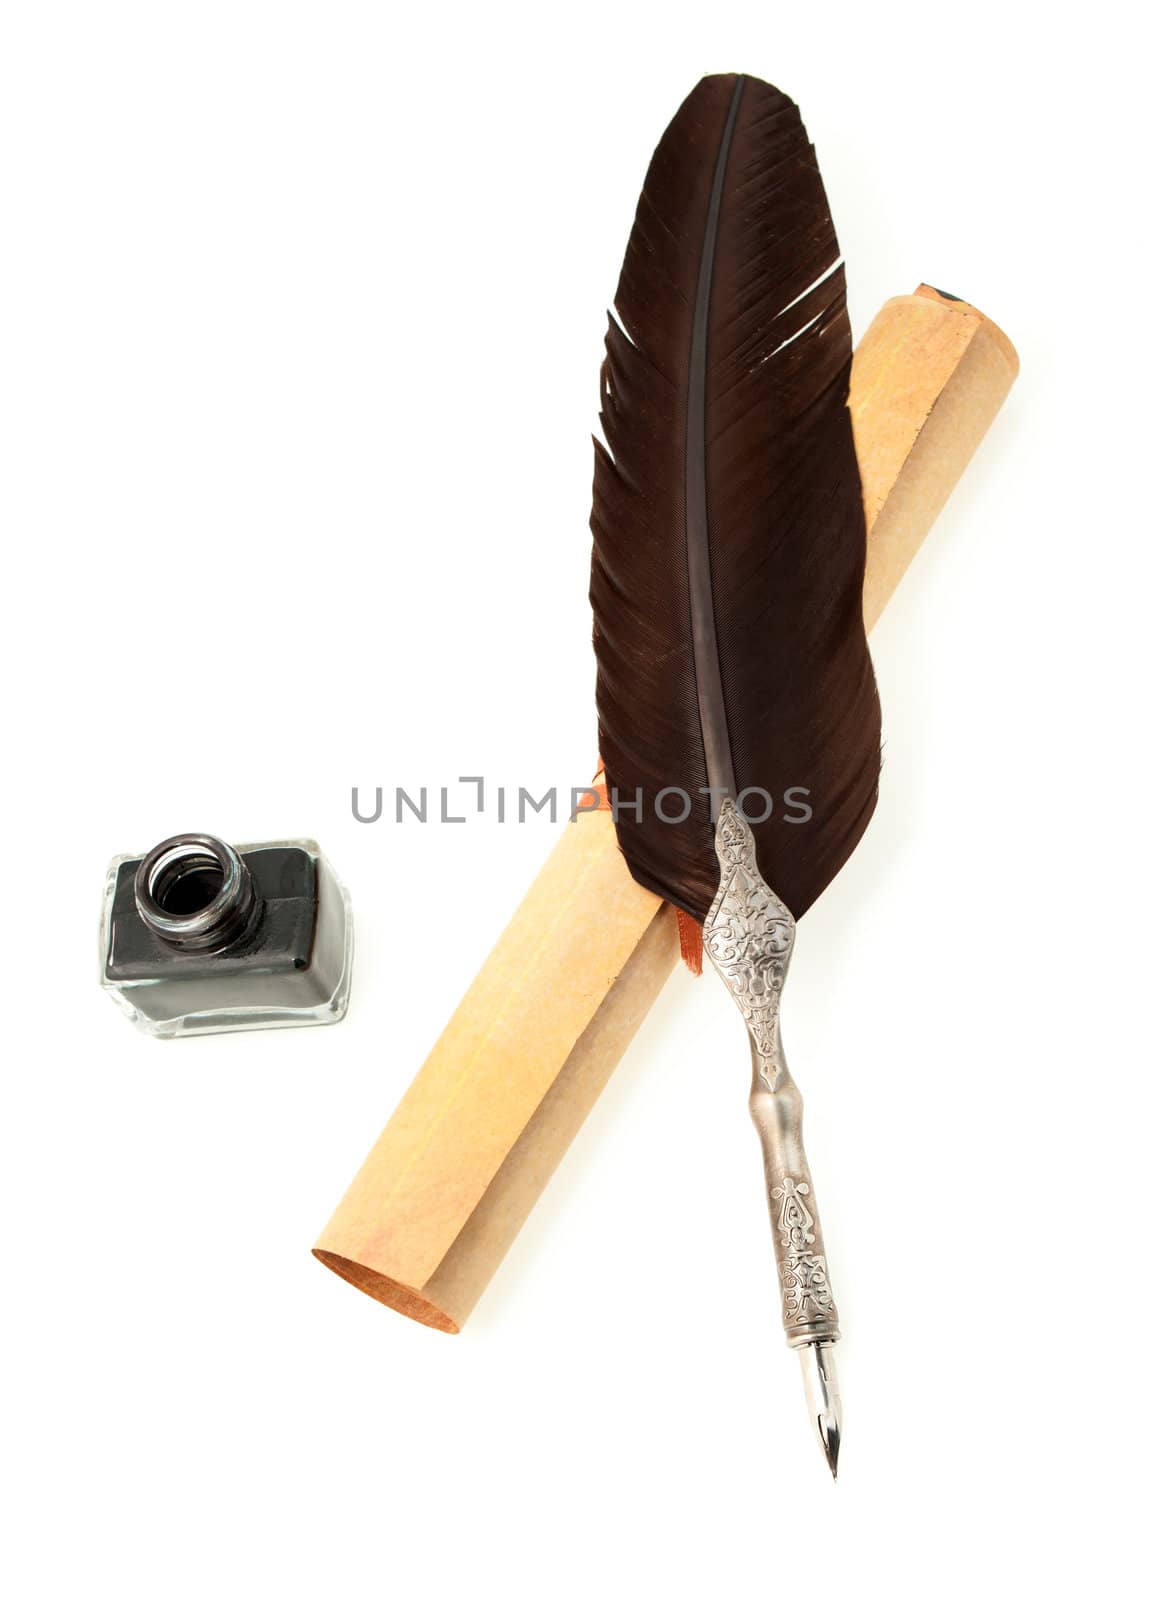 Feather quill ,inkwell and parchment roll. Isolated on white